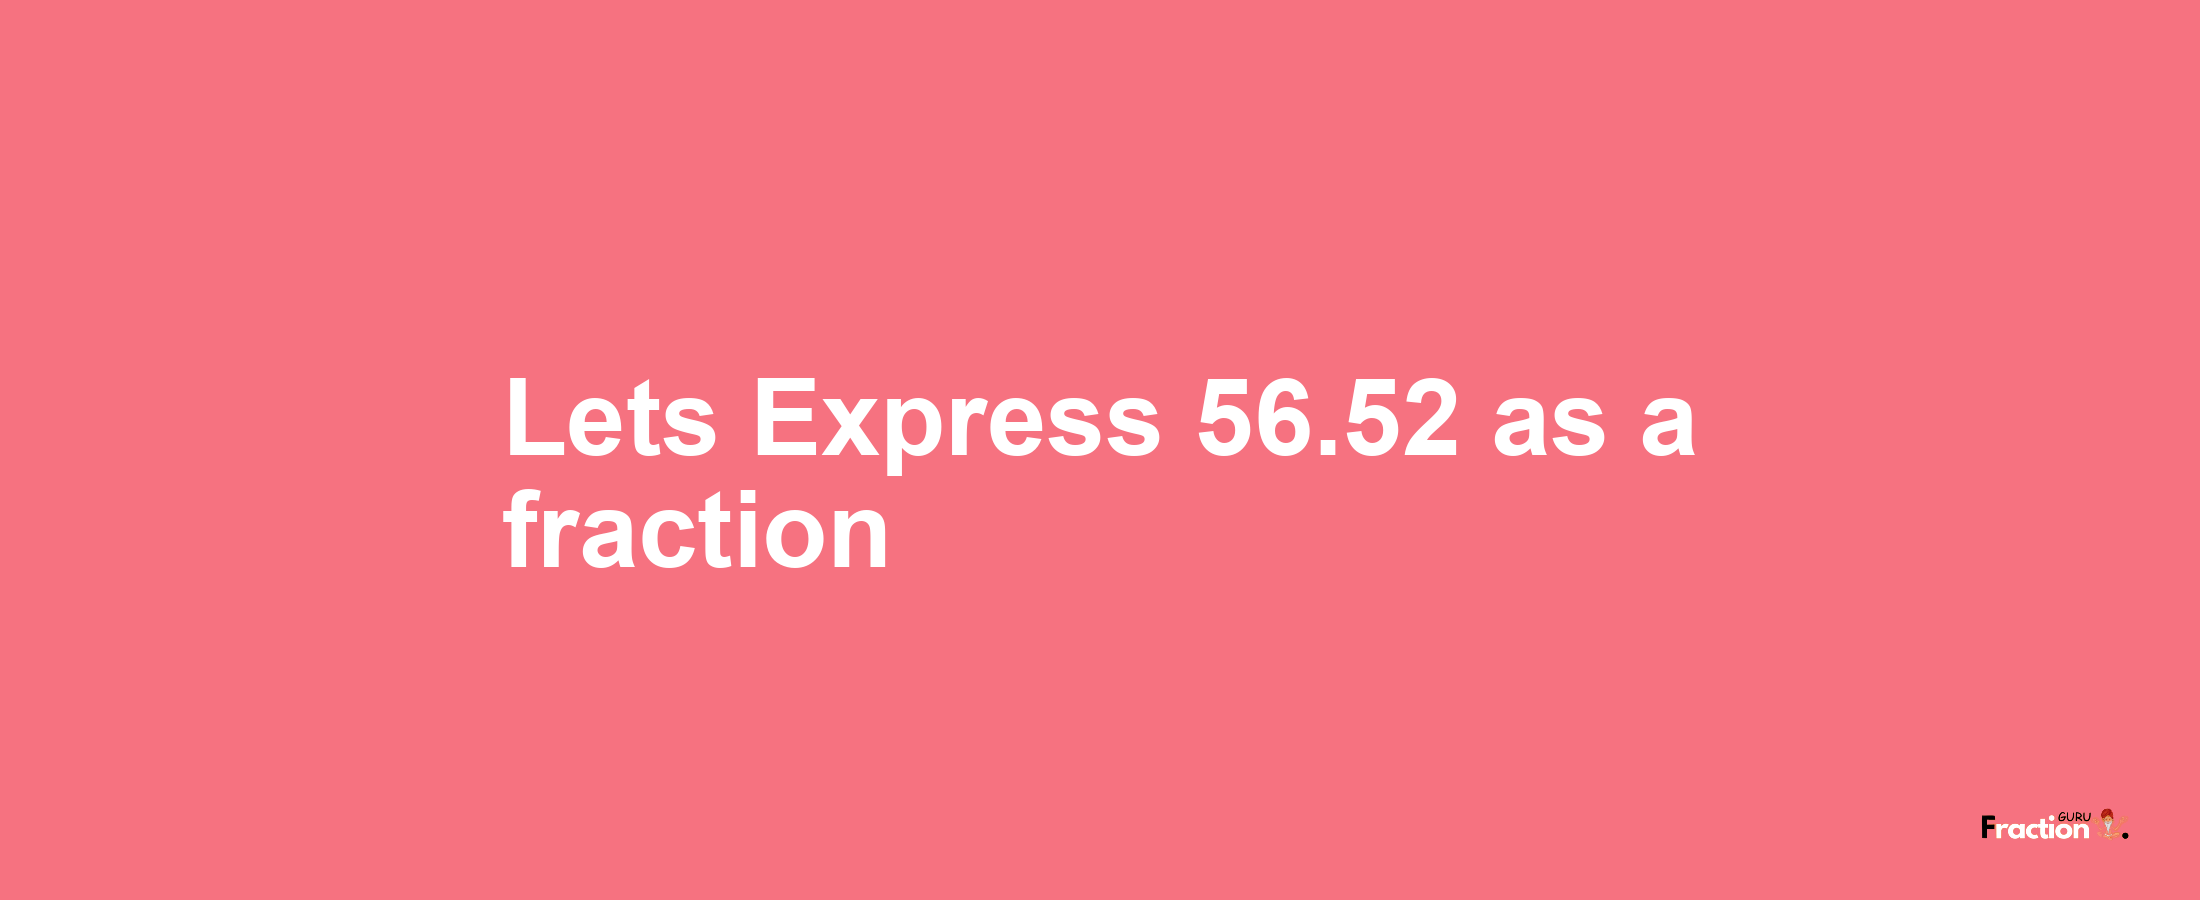 Lets Express 56.52 as afraction